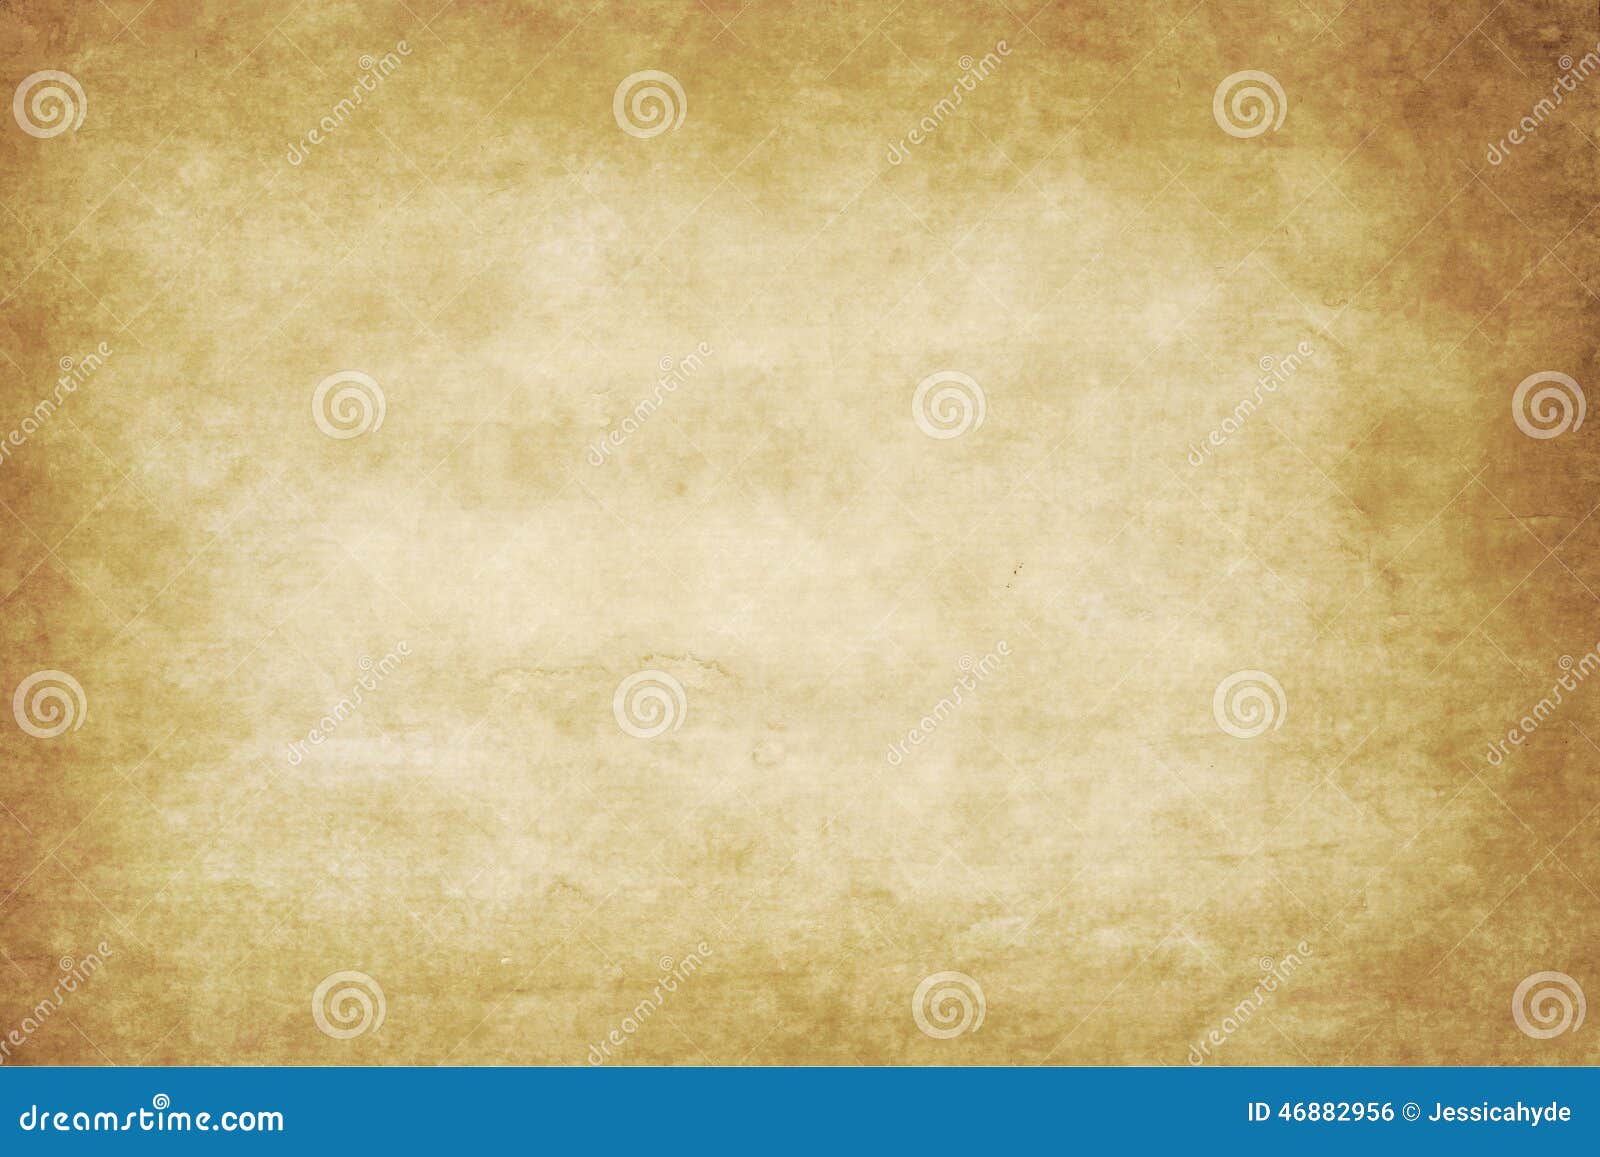 old paper texture or background with dark vignette b